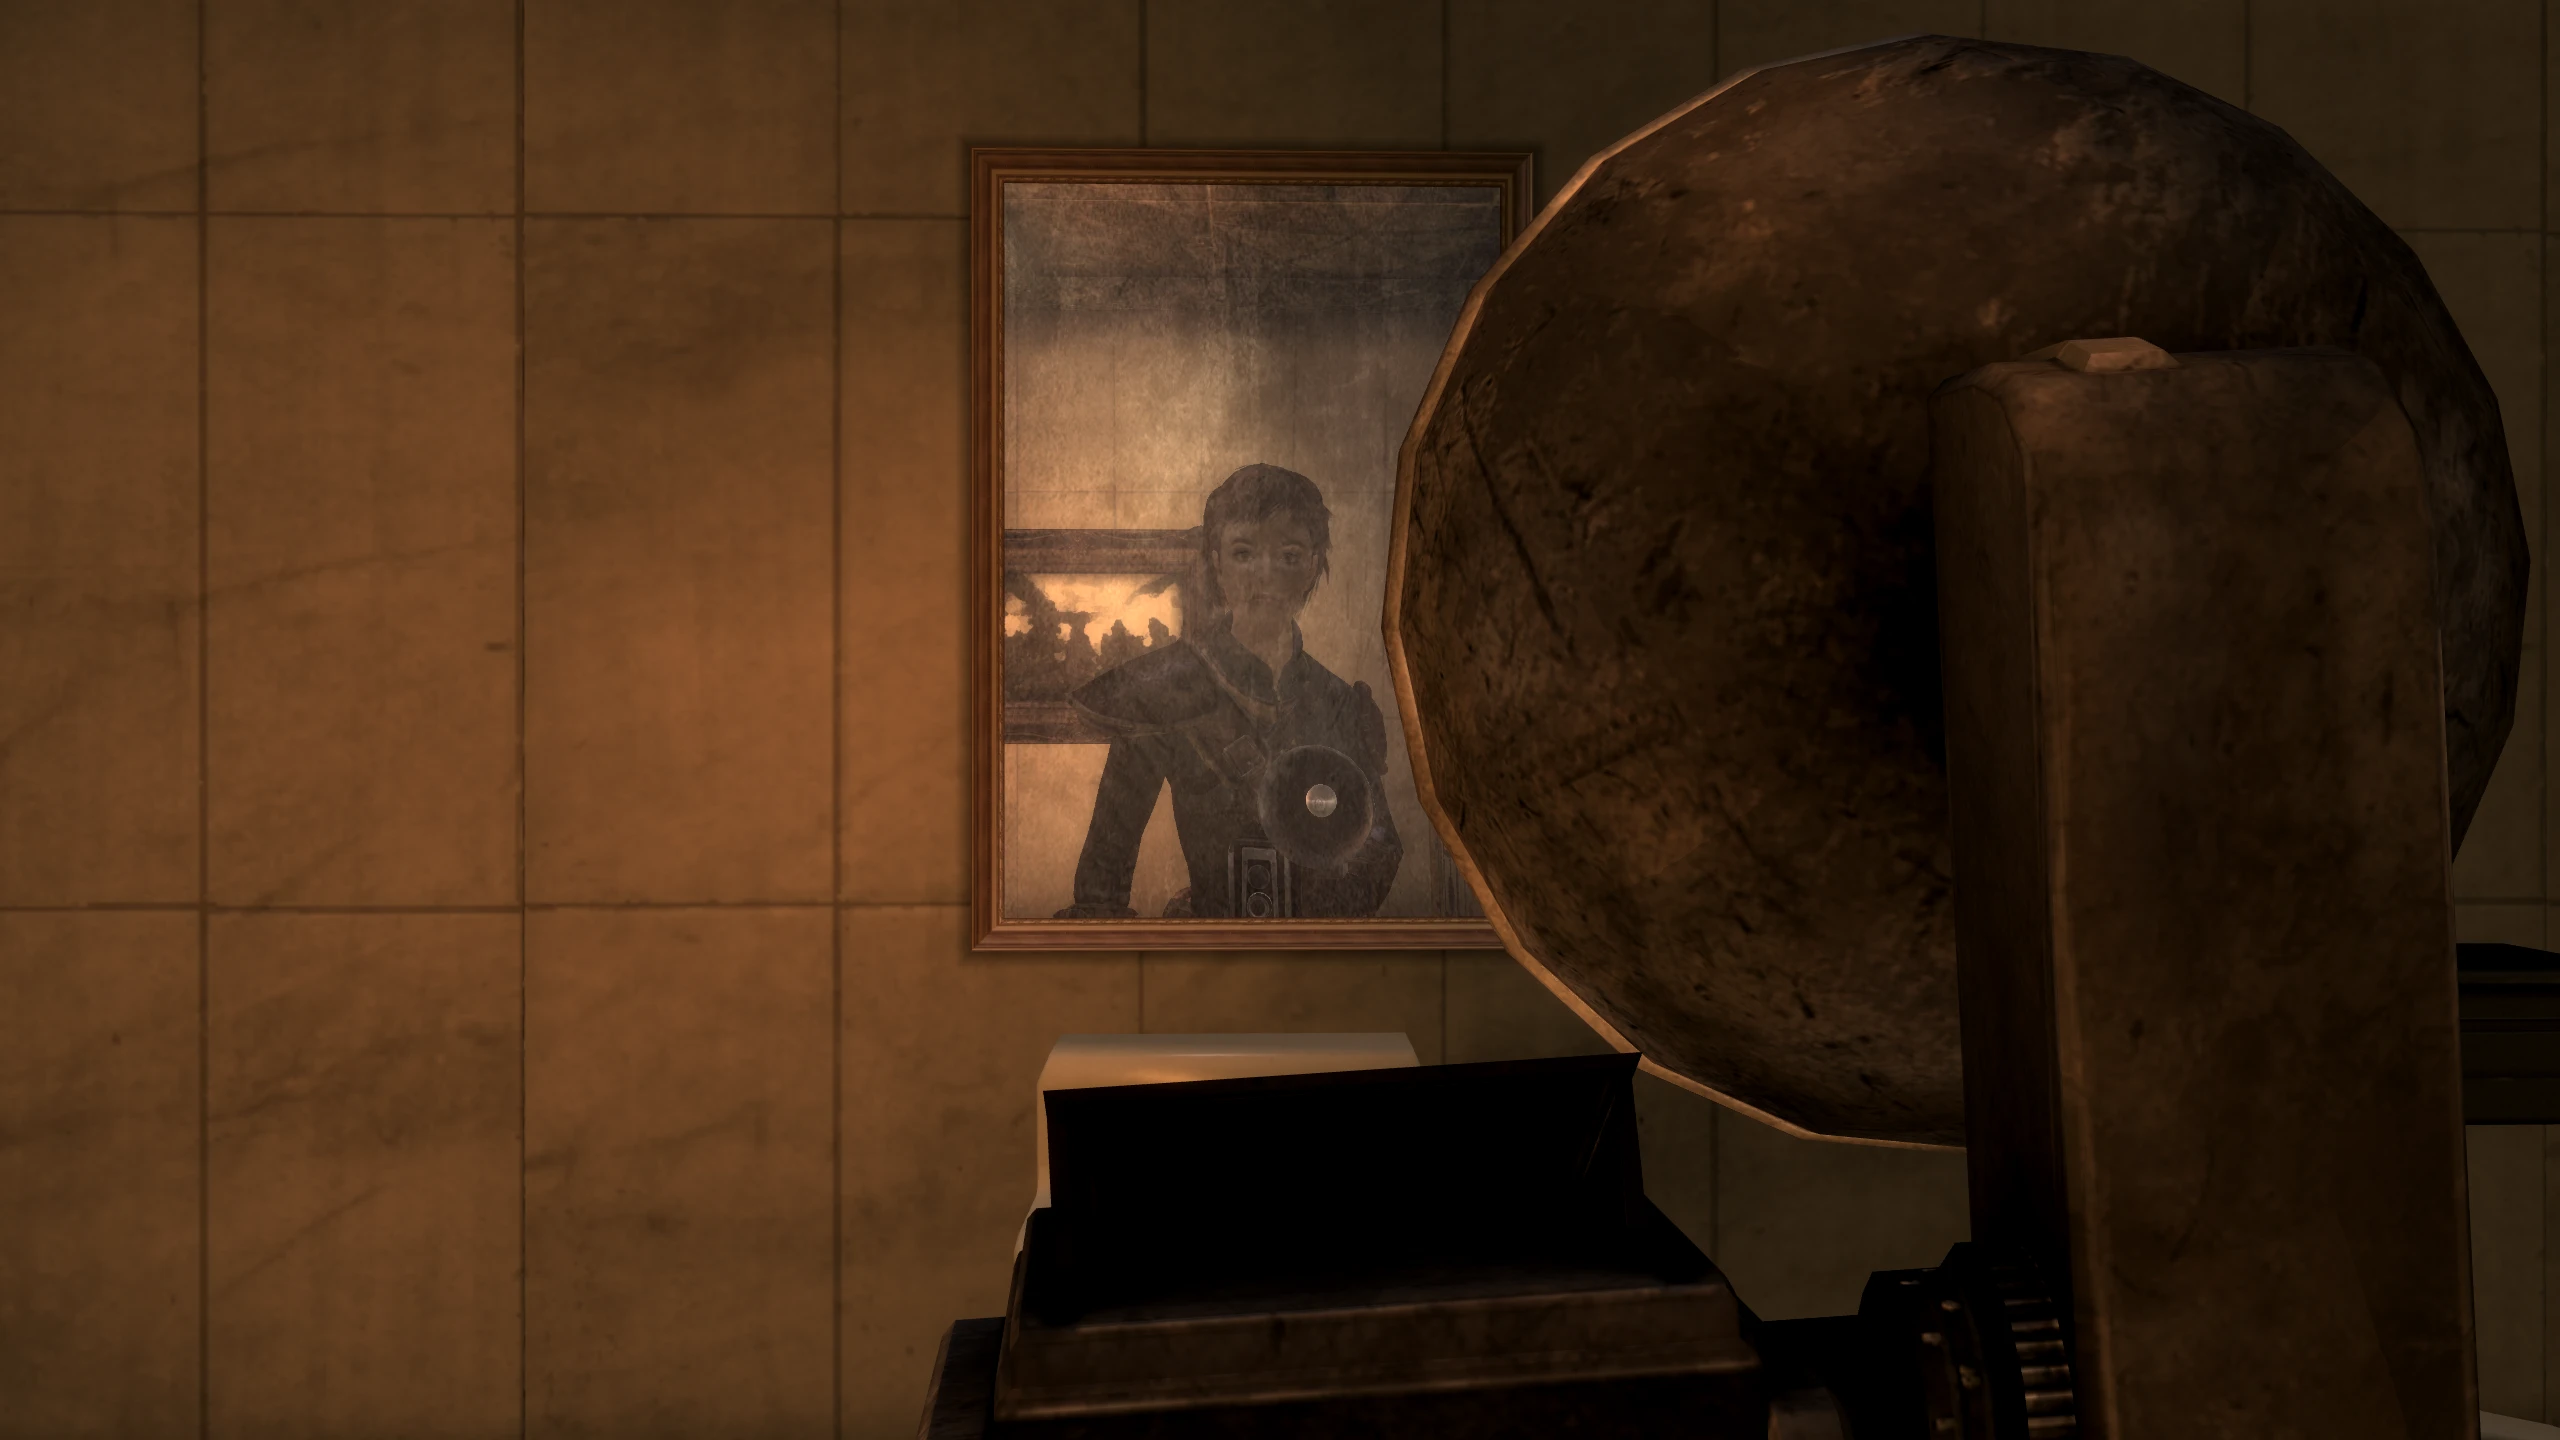 This Fallout New Vegas Mod adds a real-time reflections system